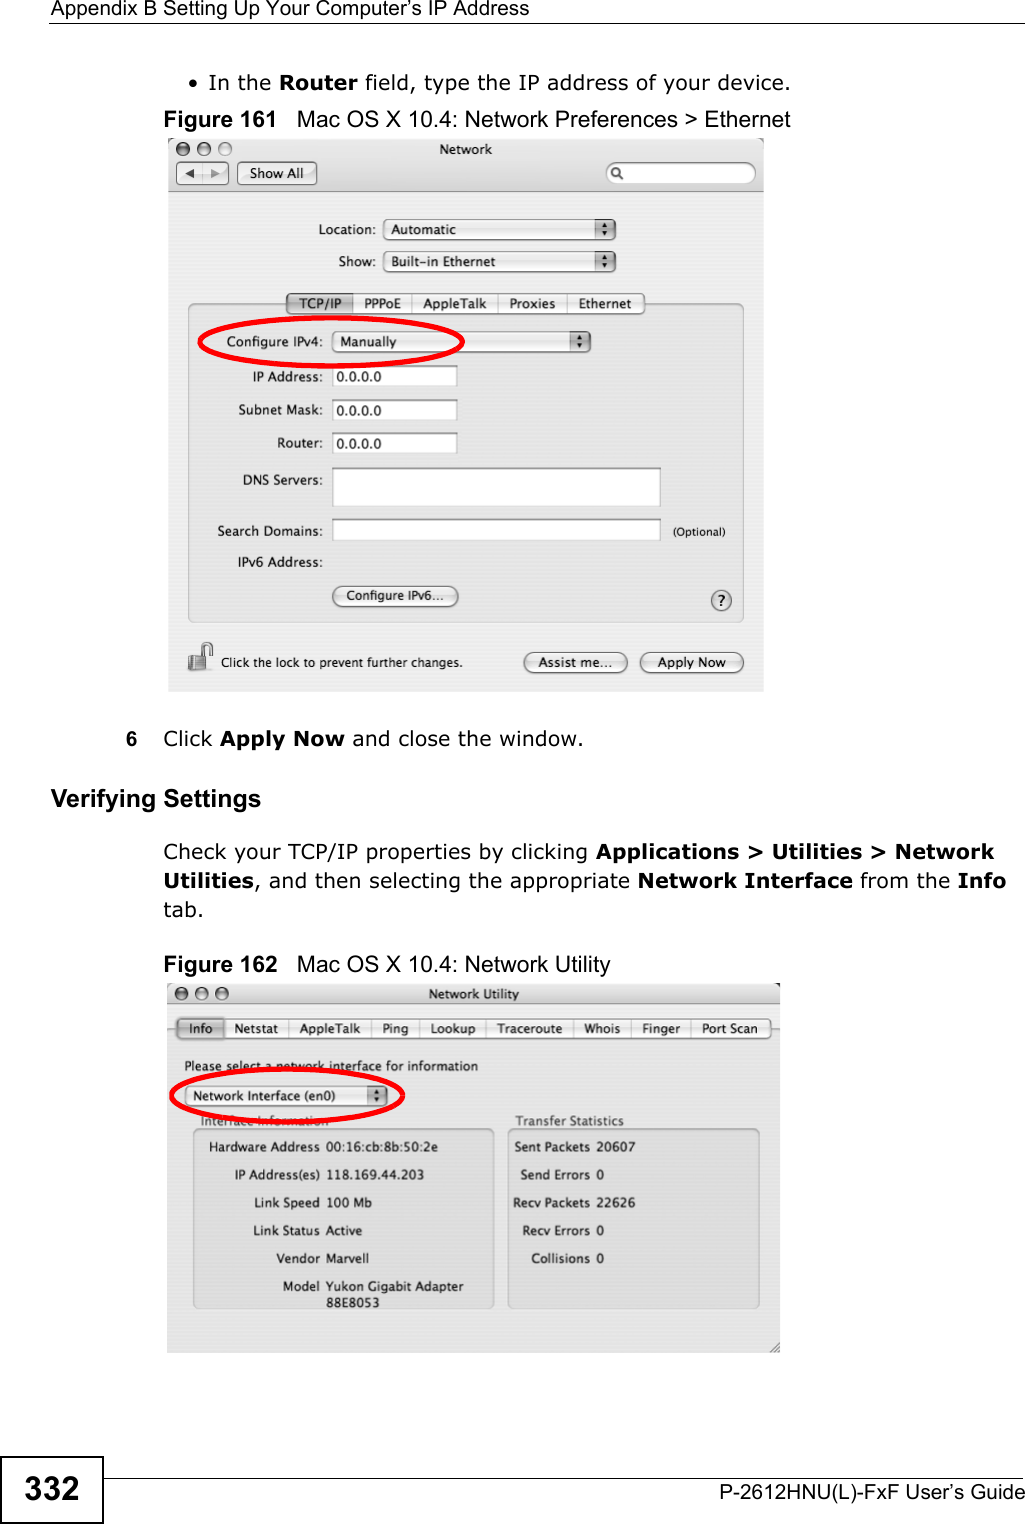 Appendix B Setting Up Your Computer’s IP AddressP-2612HNU(L)-FxF User’s Guide332• In the Router field, type the IP address of your device.Figure 161   Mac OS X 10.4: Network Preferences &gt; Ethernet6Click Apply Now and close the window.Verifying SettingsCheck your TCP/IP properties by clicking Applications &gt; Utilities &gt; Network Utilities, and then selecting the appropriate Network Interface from the Infotab.Figure 162   Mac OS X 10.4: Network Utility